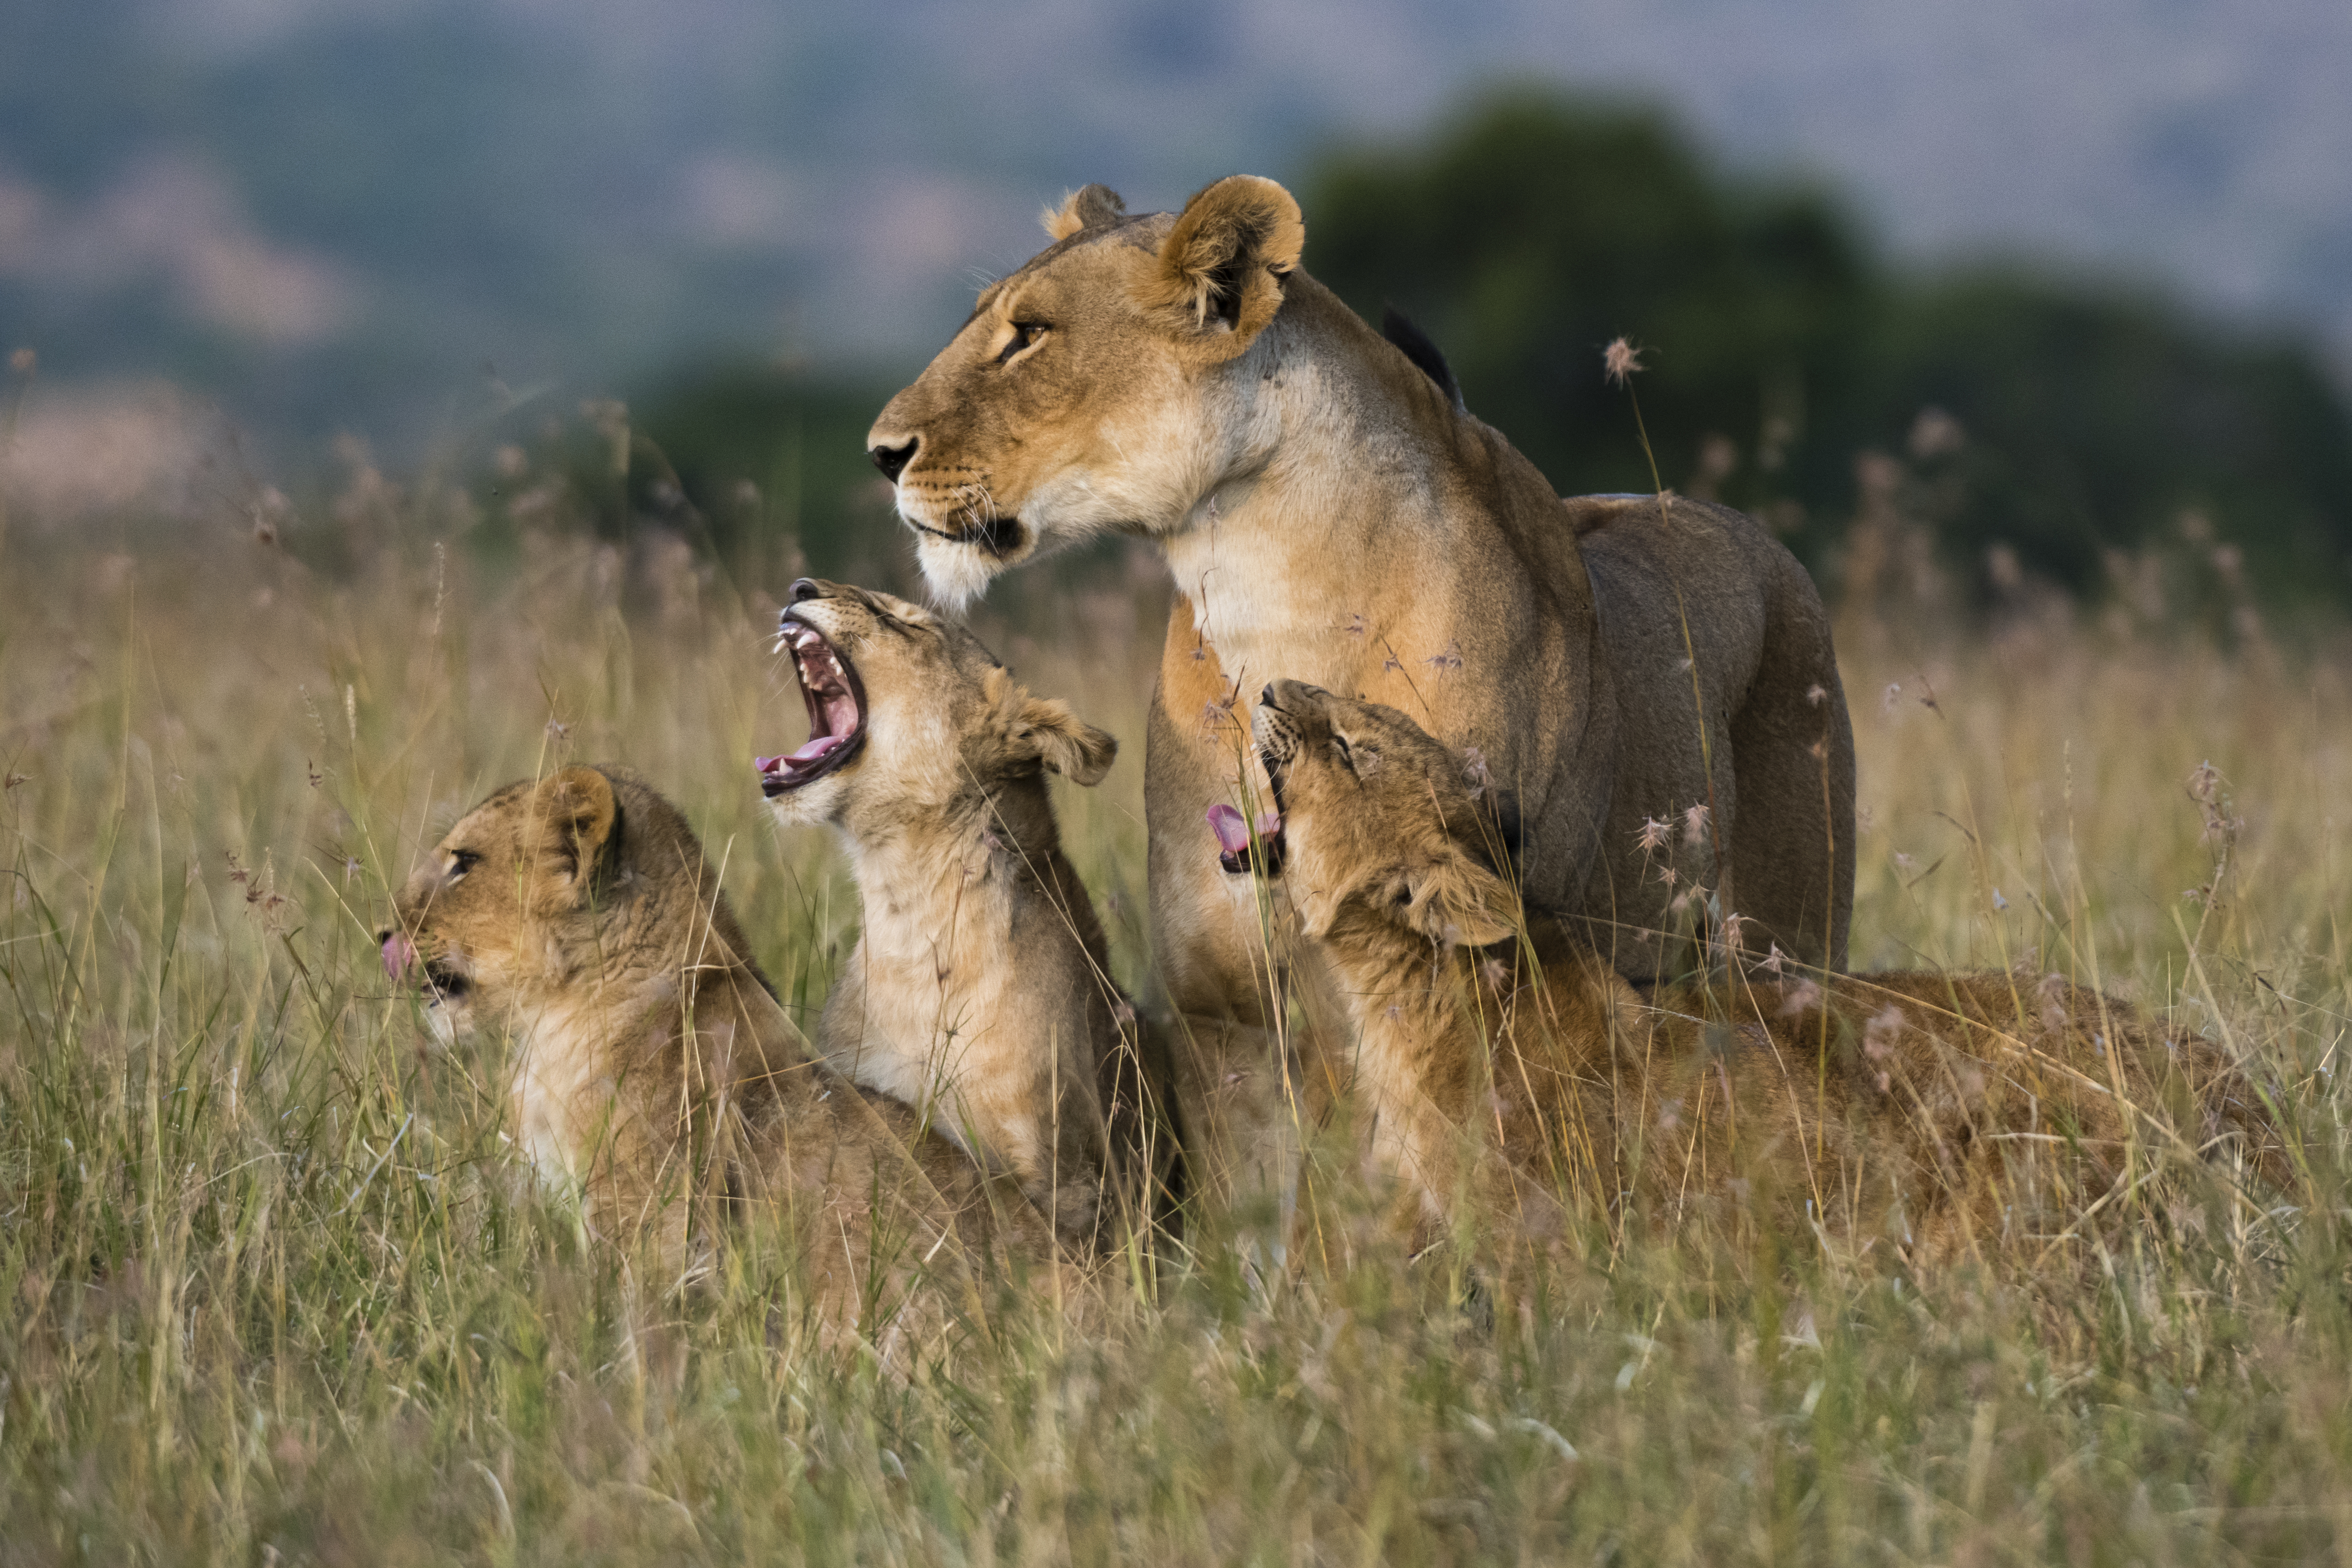 "A lioness greeted by the her cubs upon her return, Masai Mara, Kenya."